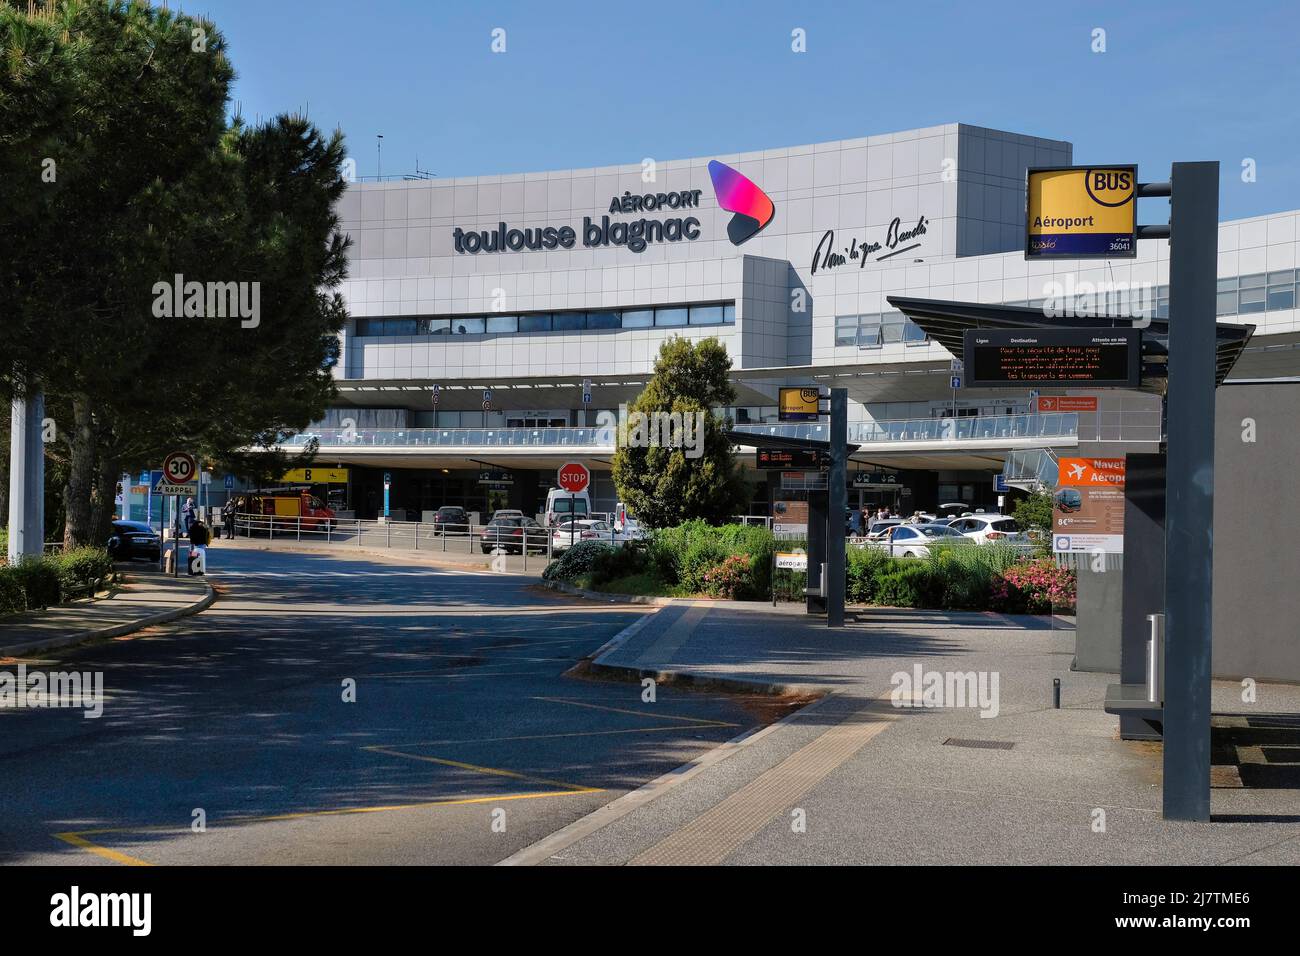 Toulouse Haute-Garonne France 05.10.22 Toulouse–Blagnac, sixth-busiest international airport in France. Main entrance, Modern Building. Bus stop. Stock Photo